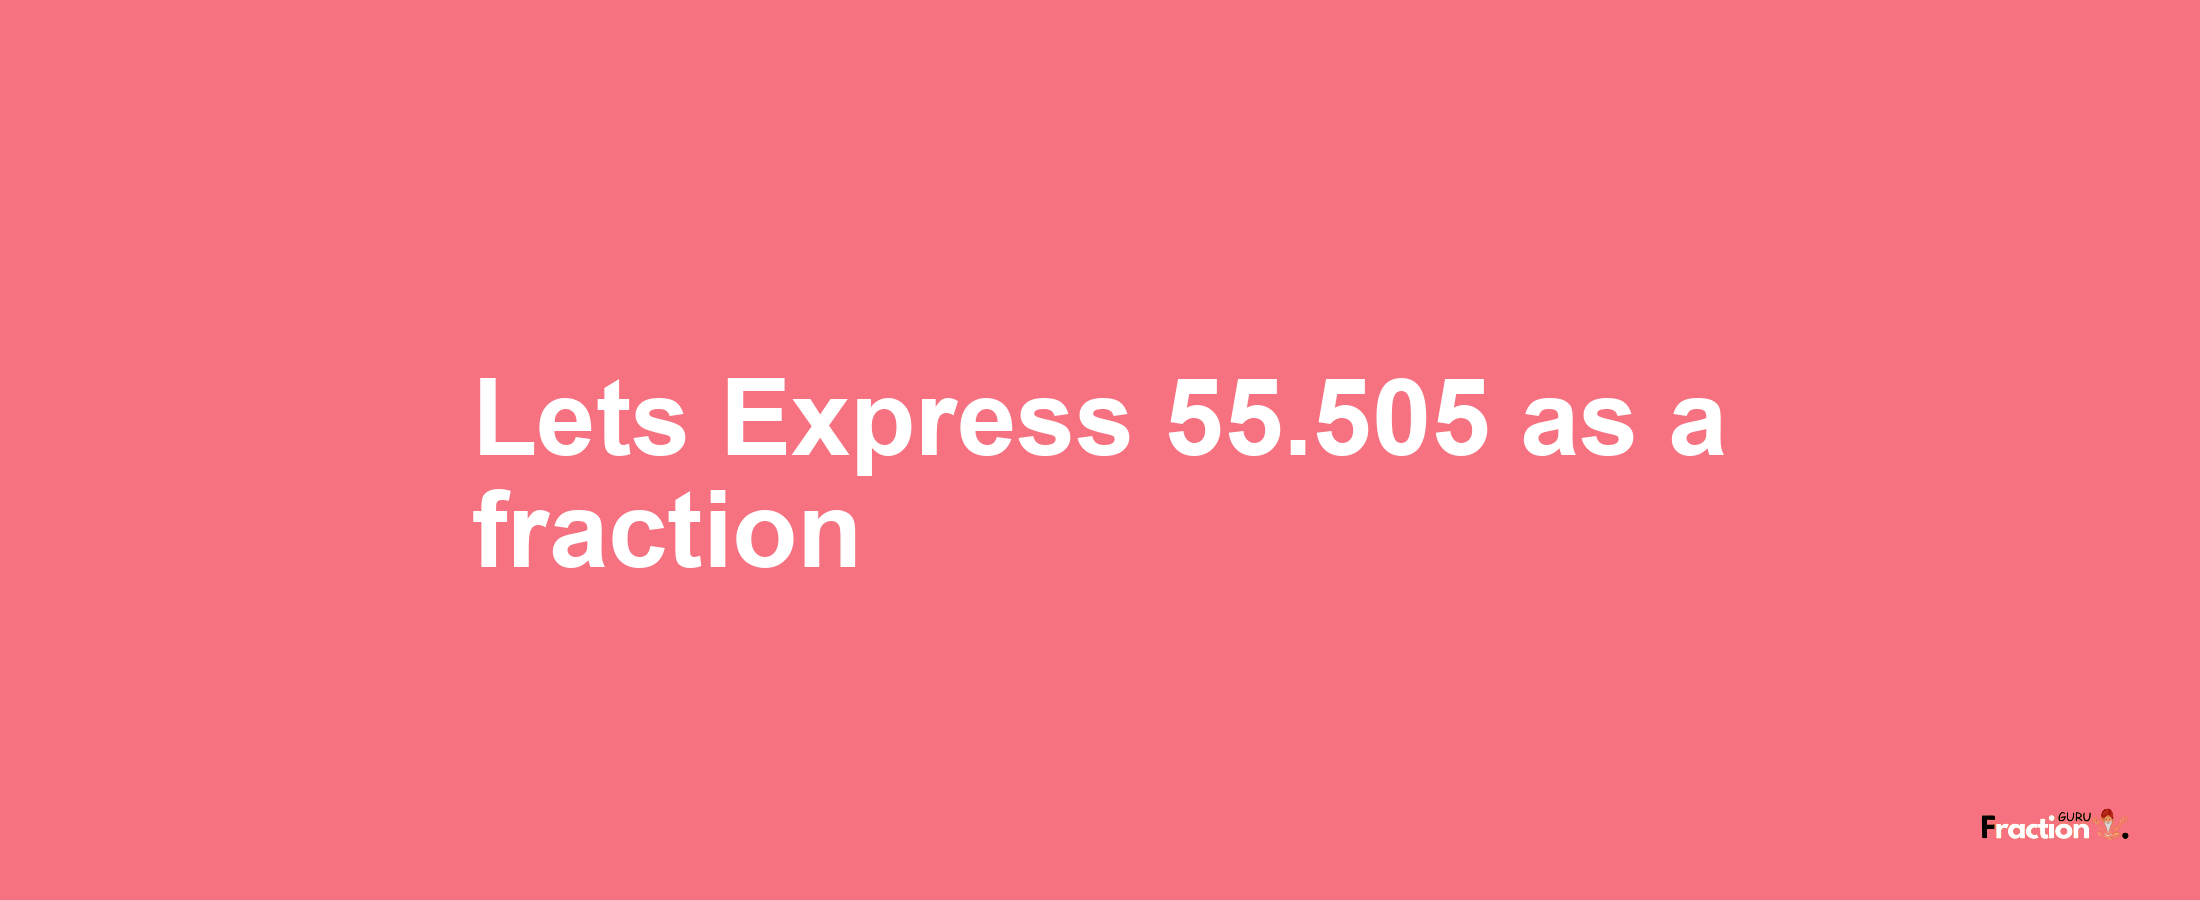 Lets Express 55.505 as afraction